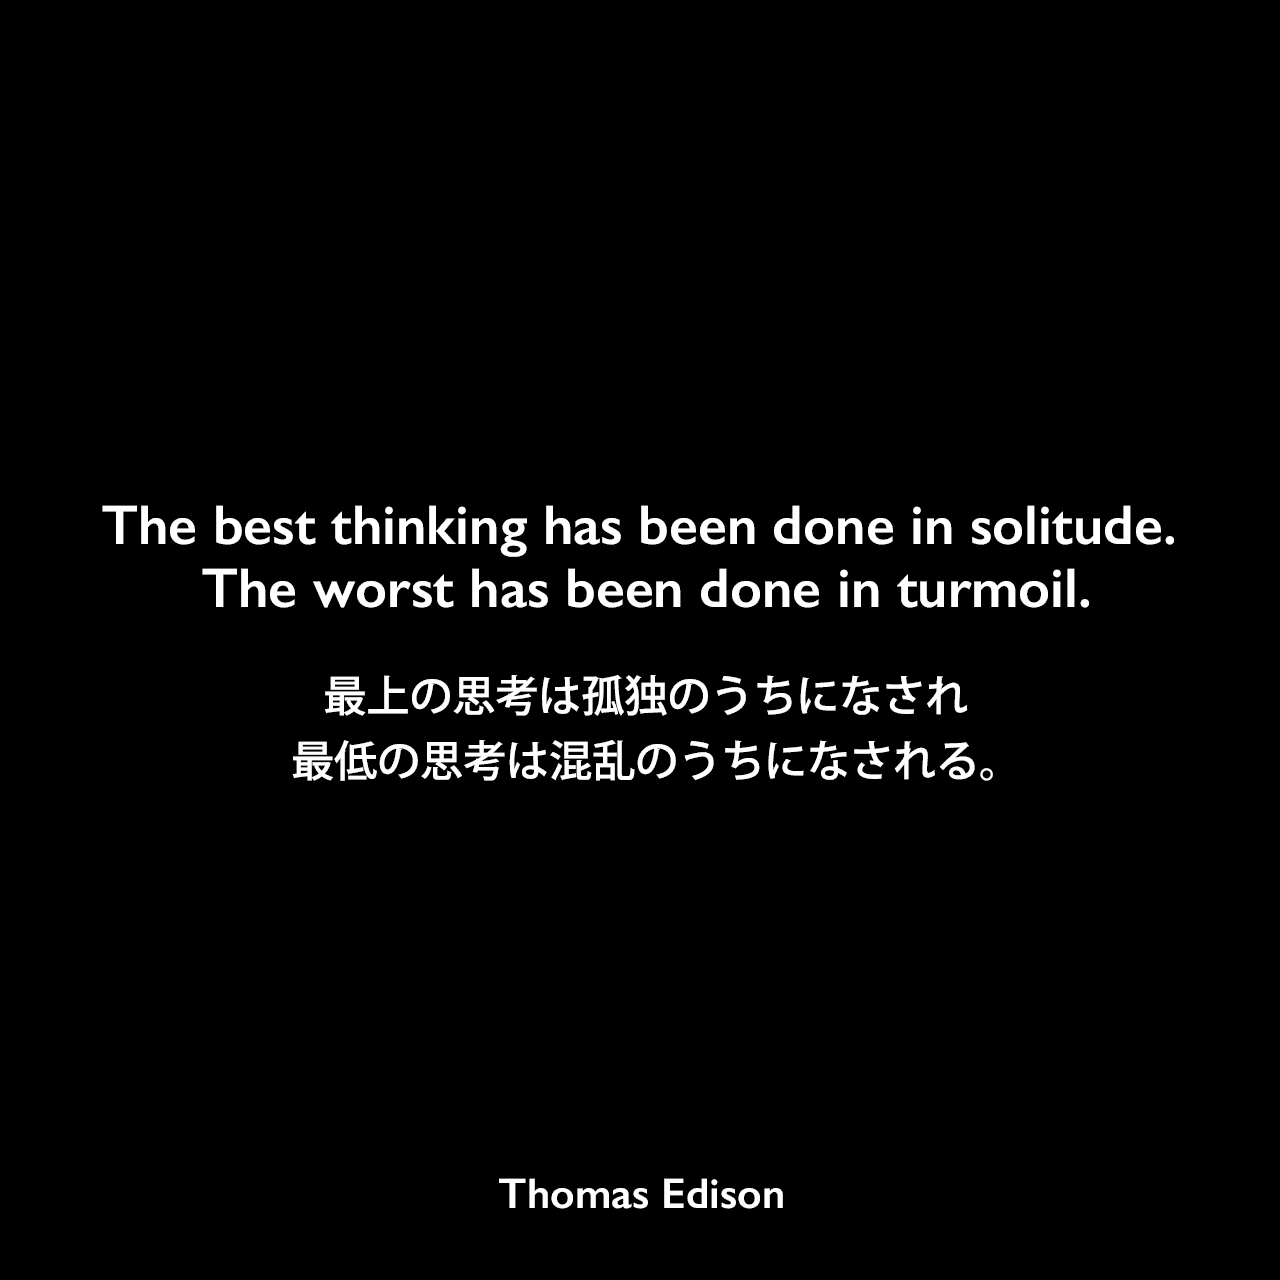 The best thinking has been done in solitude. The worst has been done in turmoil.最上の思考は孤独のうちになされ、最低の思考は混乱のうちになされる。